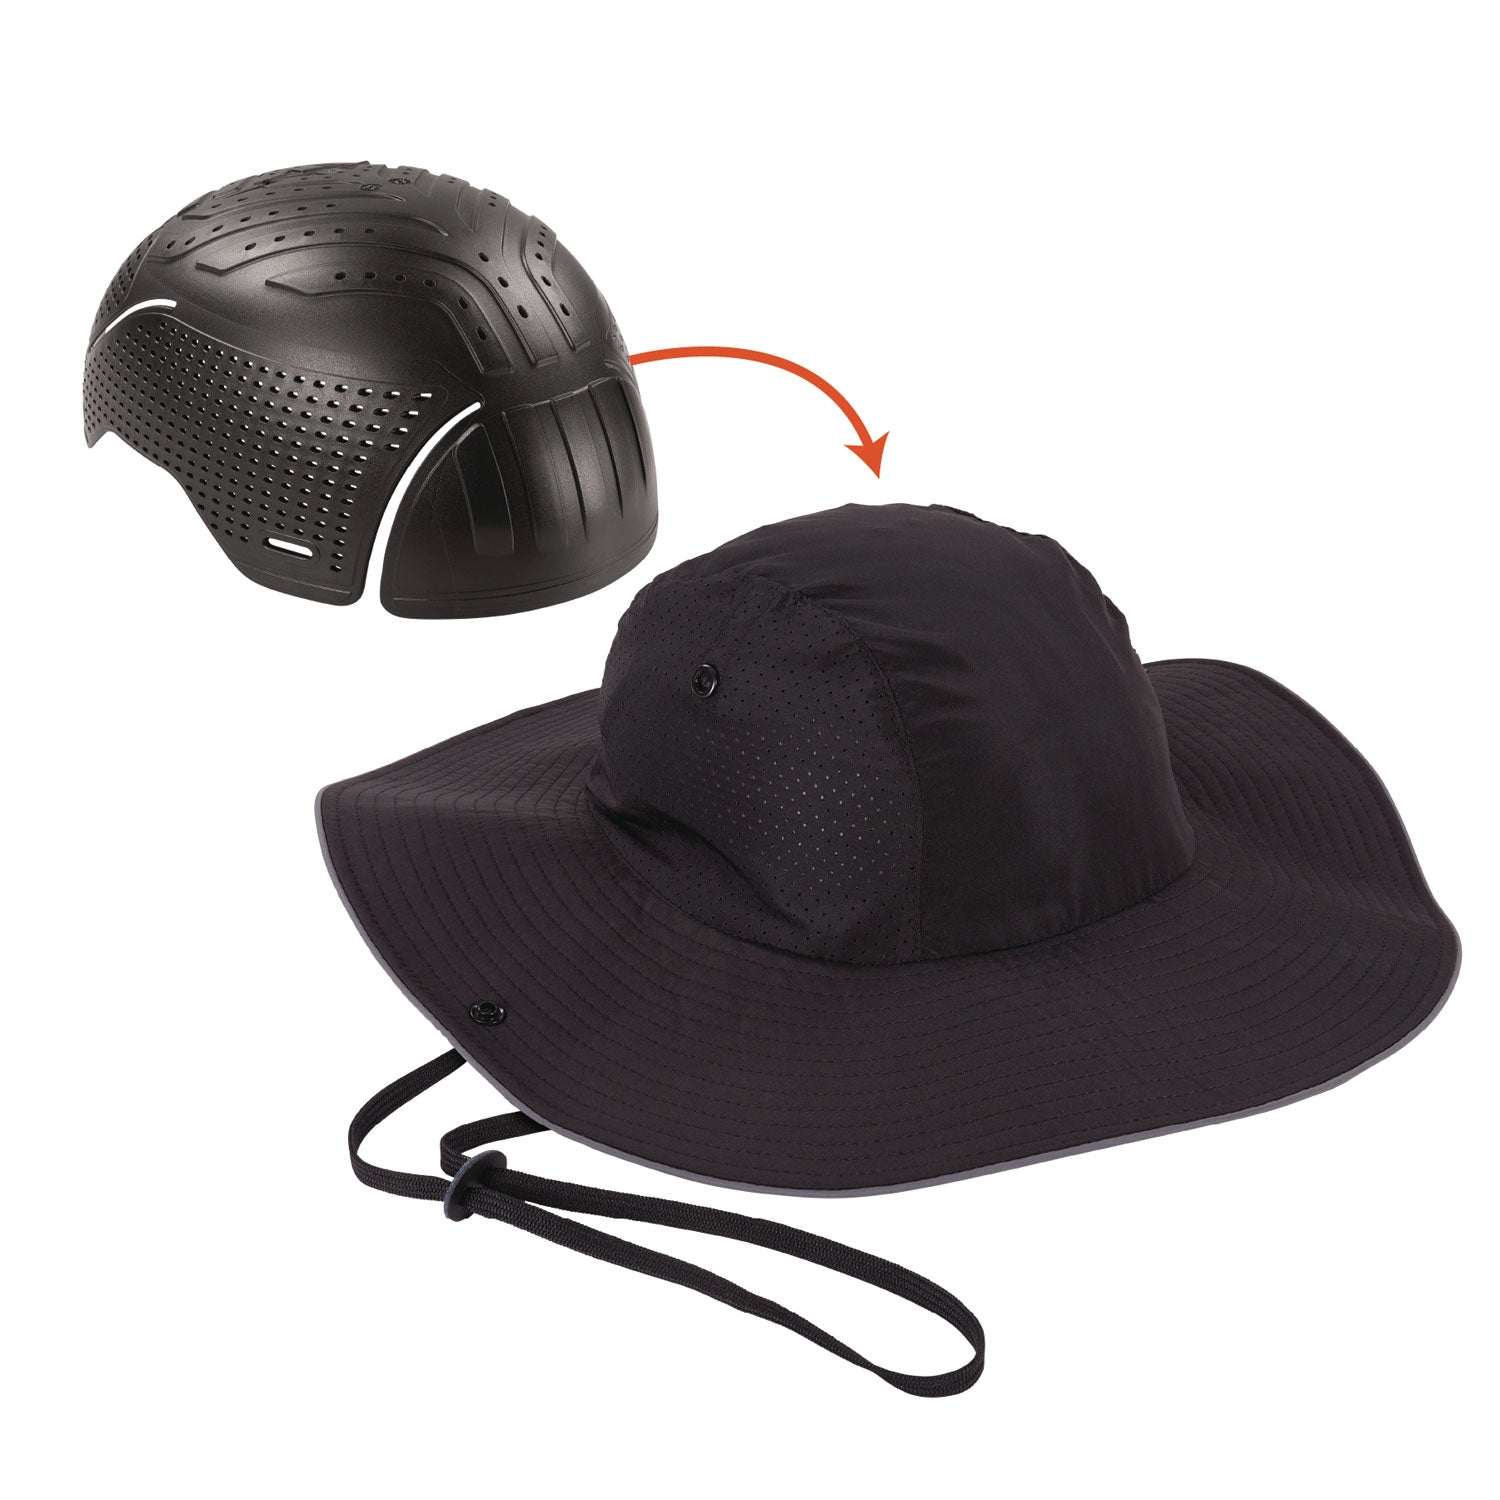 skullerz-8957-lightweight-ranger-hat-and-bump-cap-insert-x-small-small-black-ships-in-1-3-business-days_ego23459 - 1